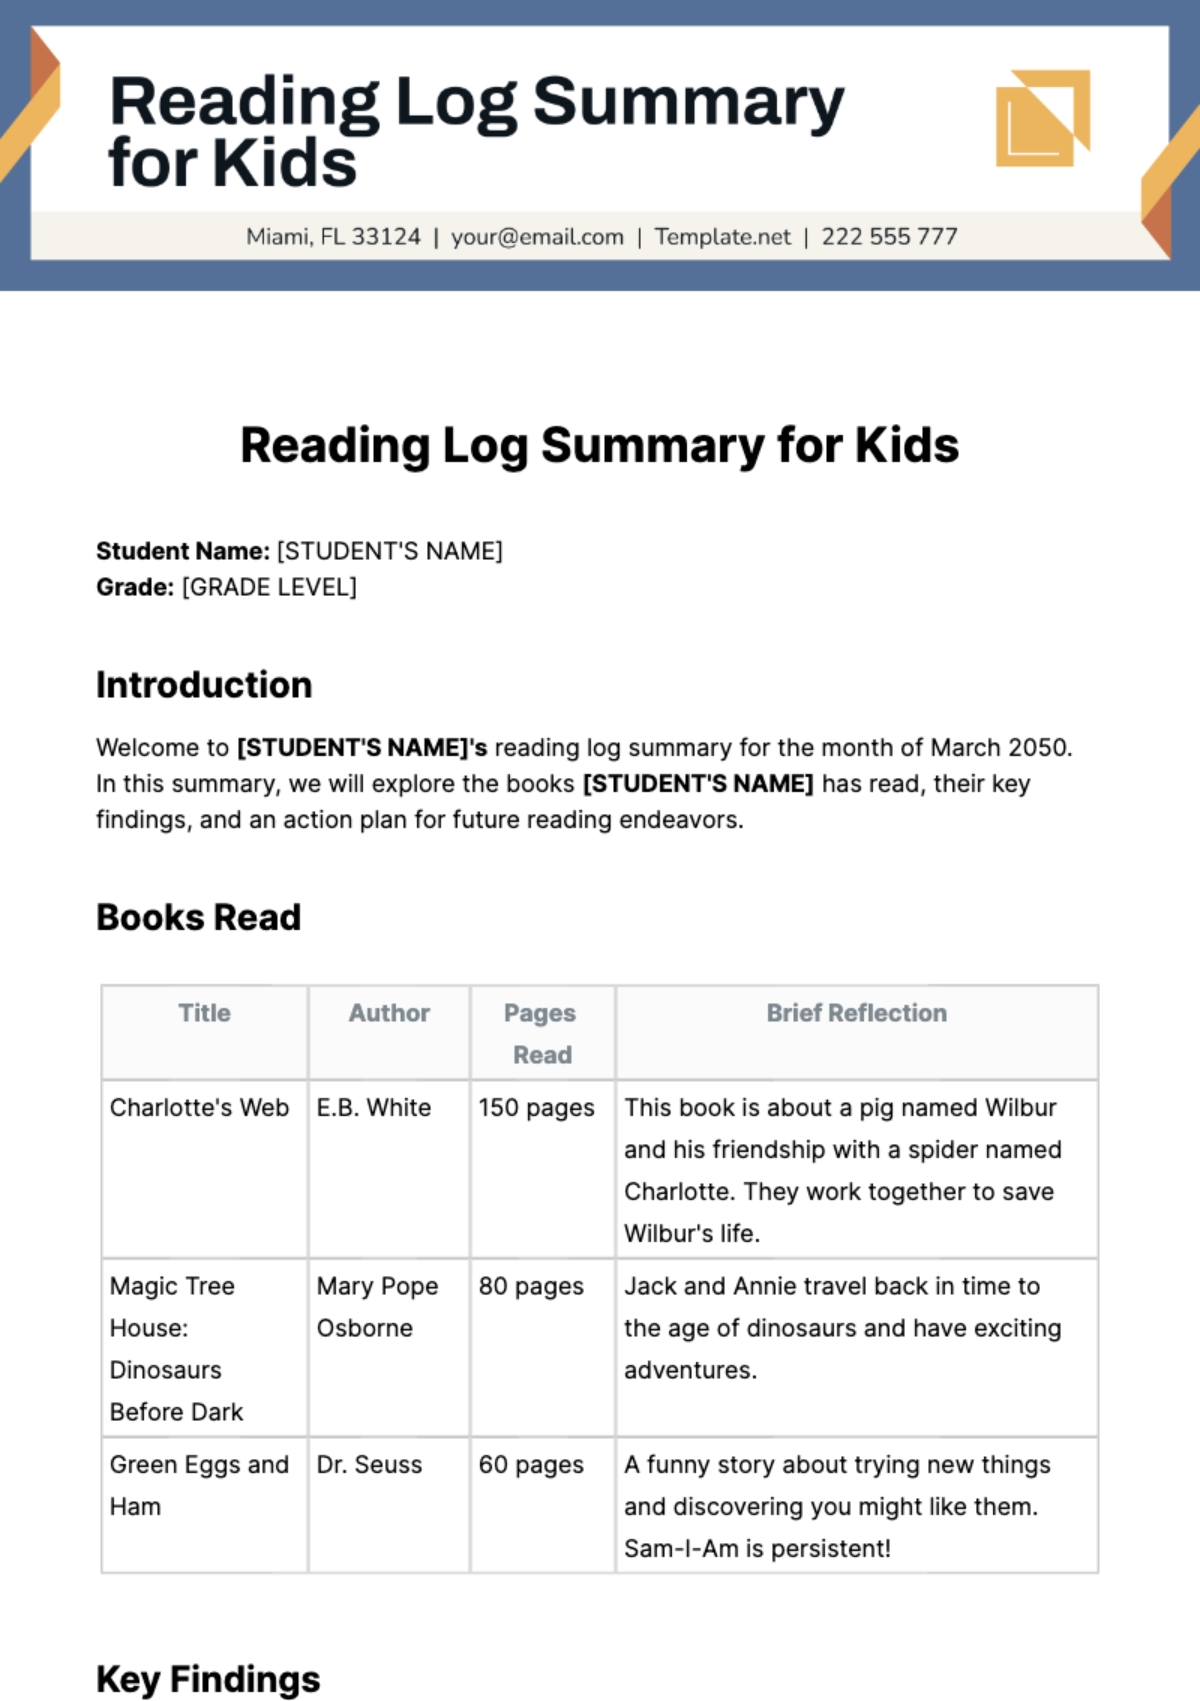 Reading Log Summary for Kids Template